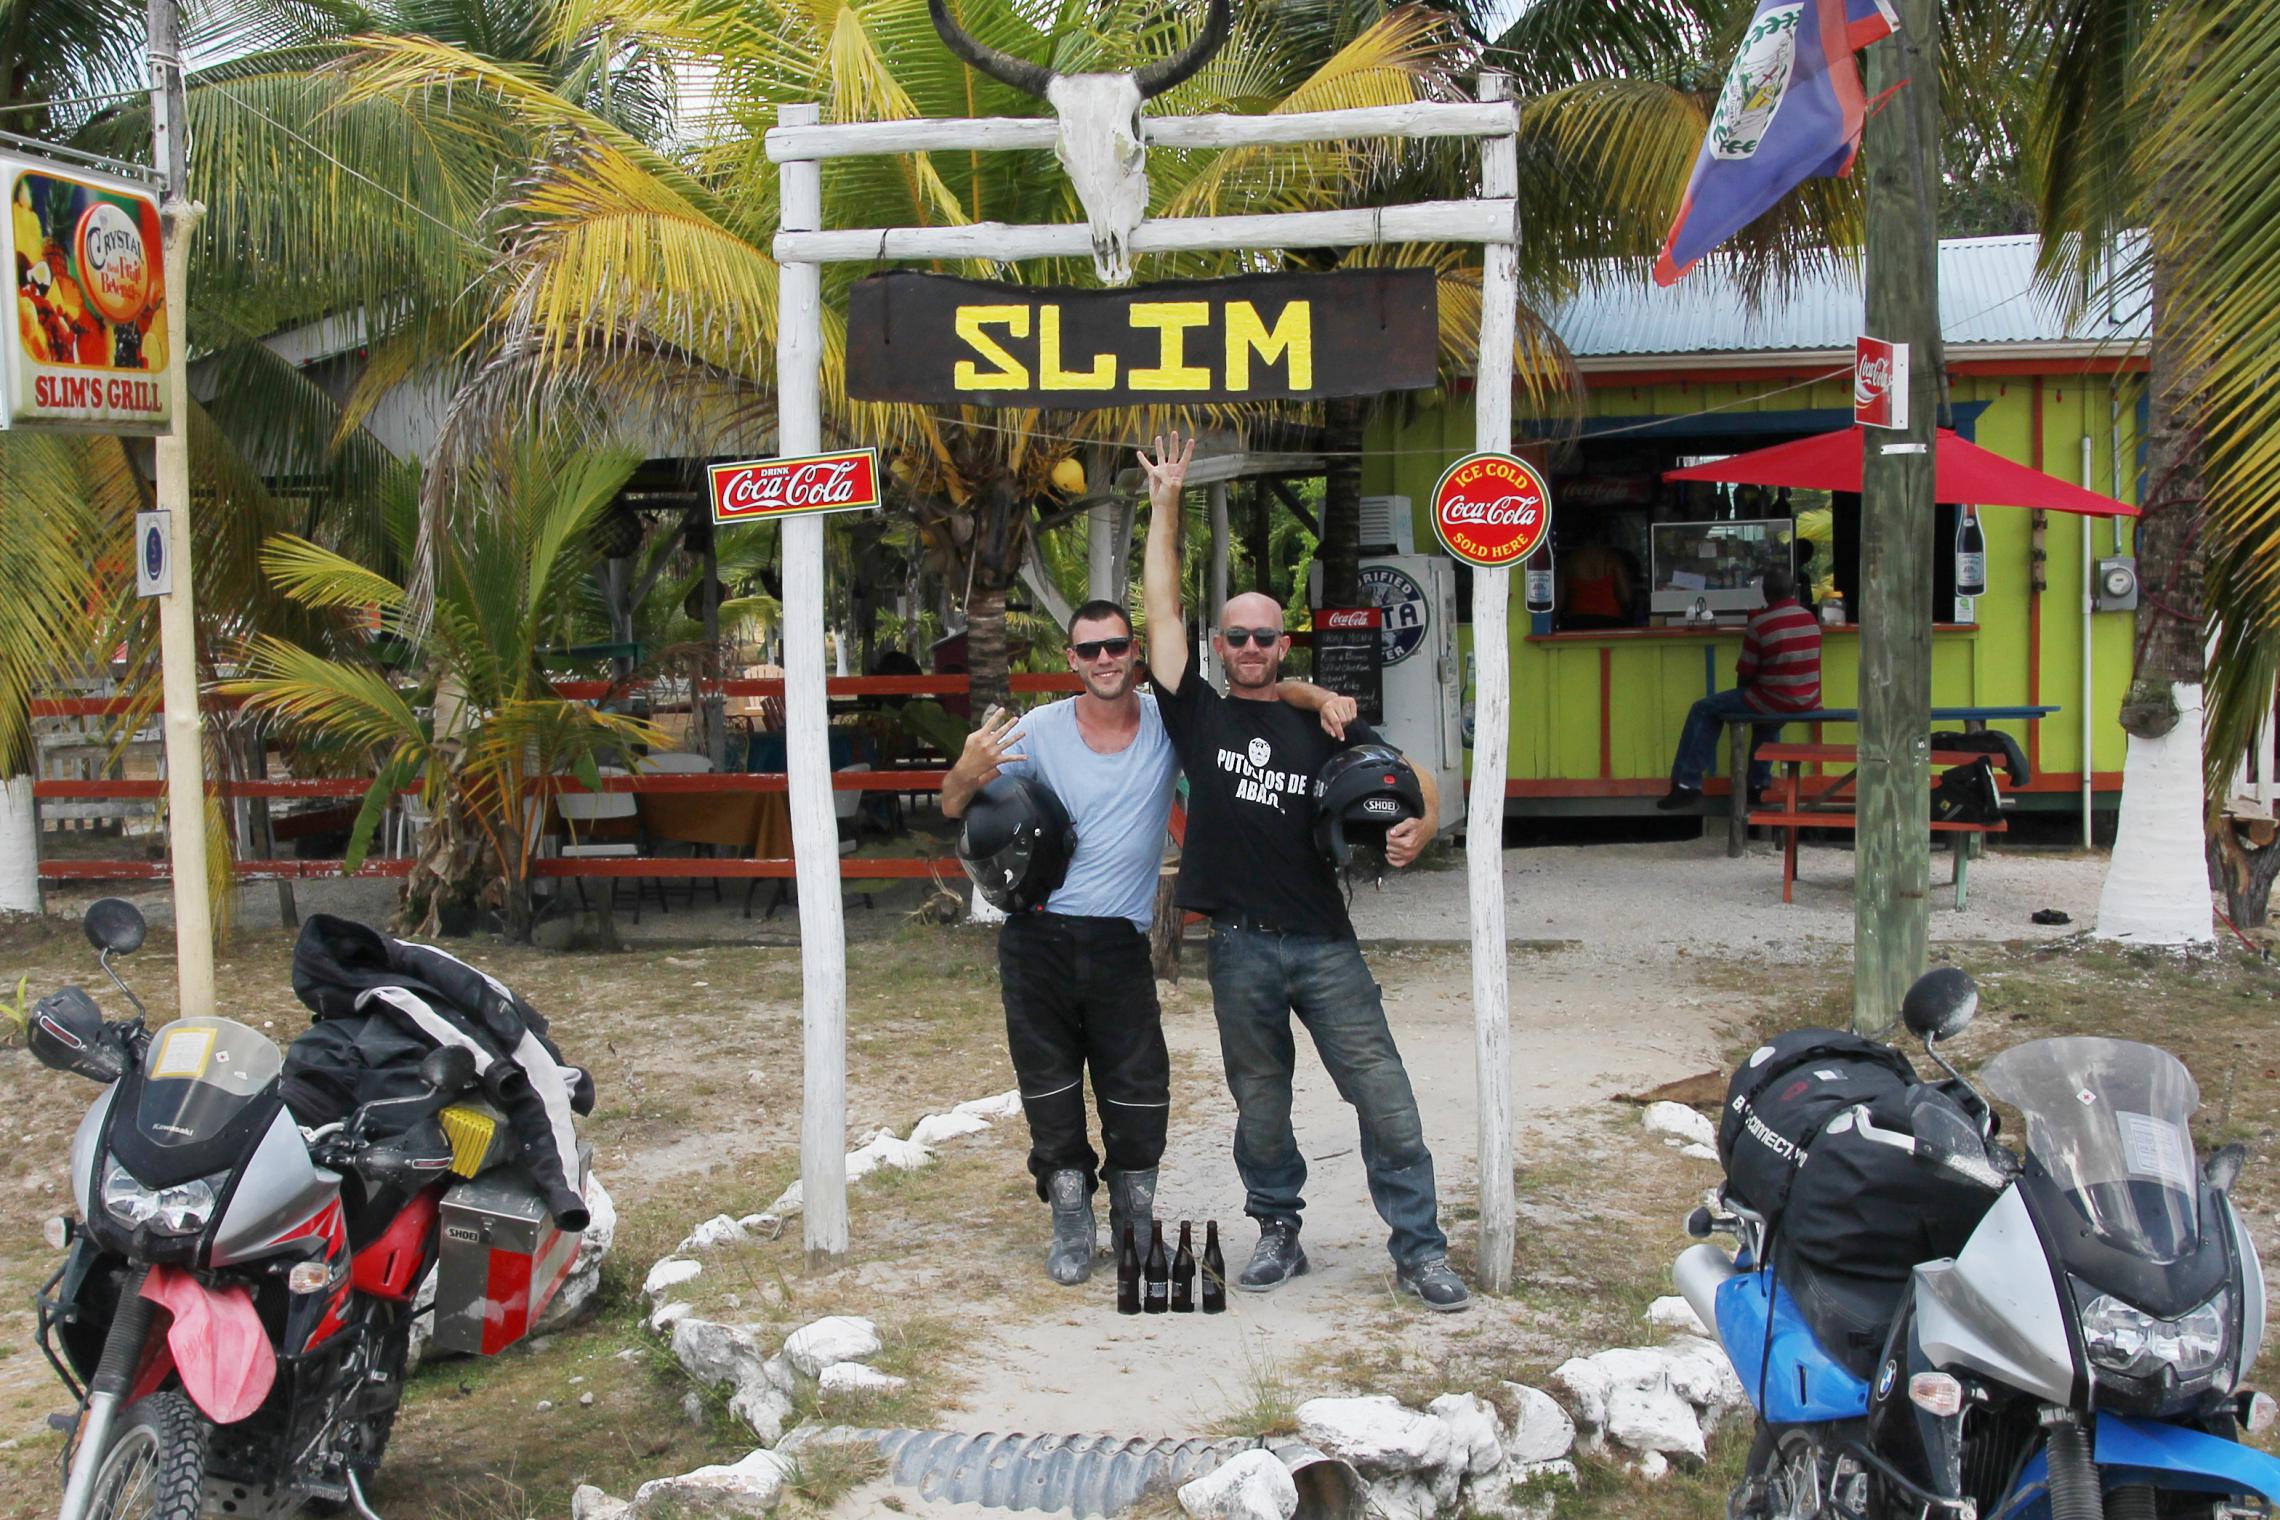 4,000 miles - The road to the Guatemalan border, Belieze -- Outside Slim's, a pitstop for overland travelers